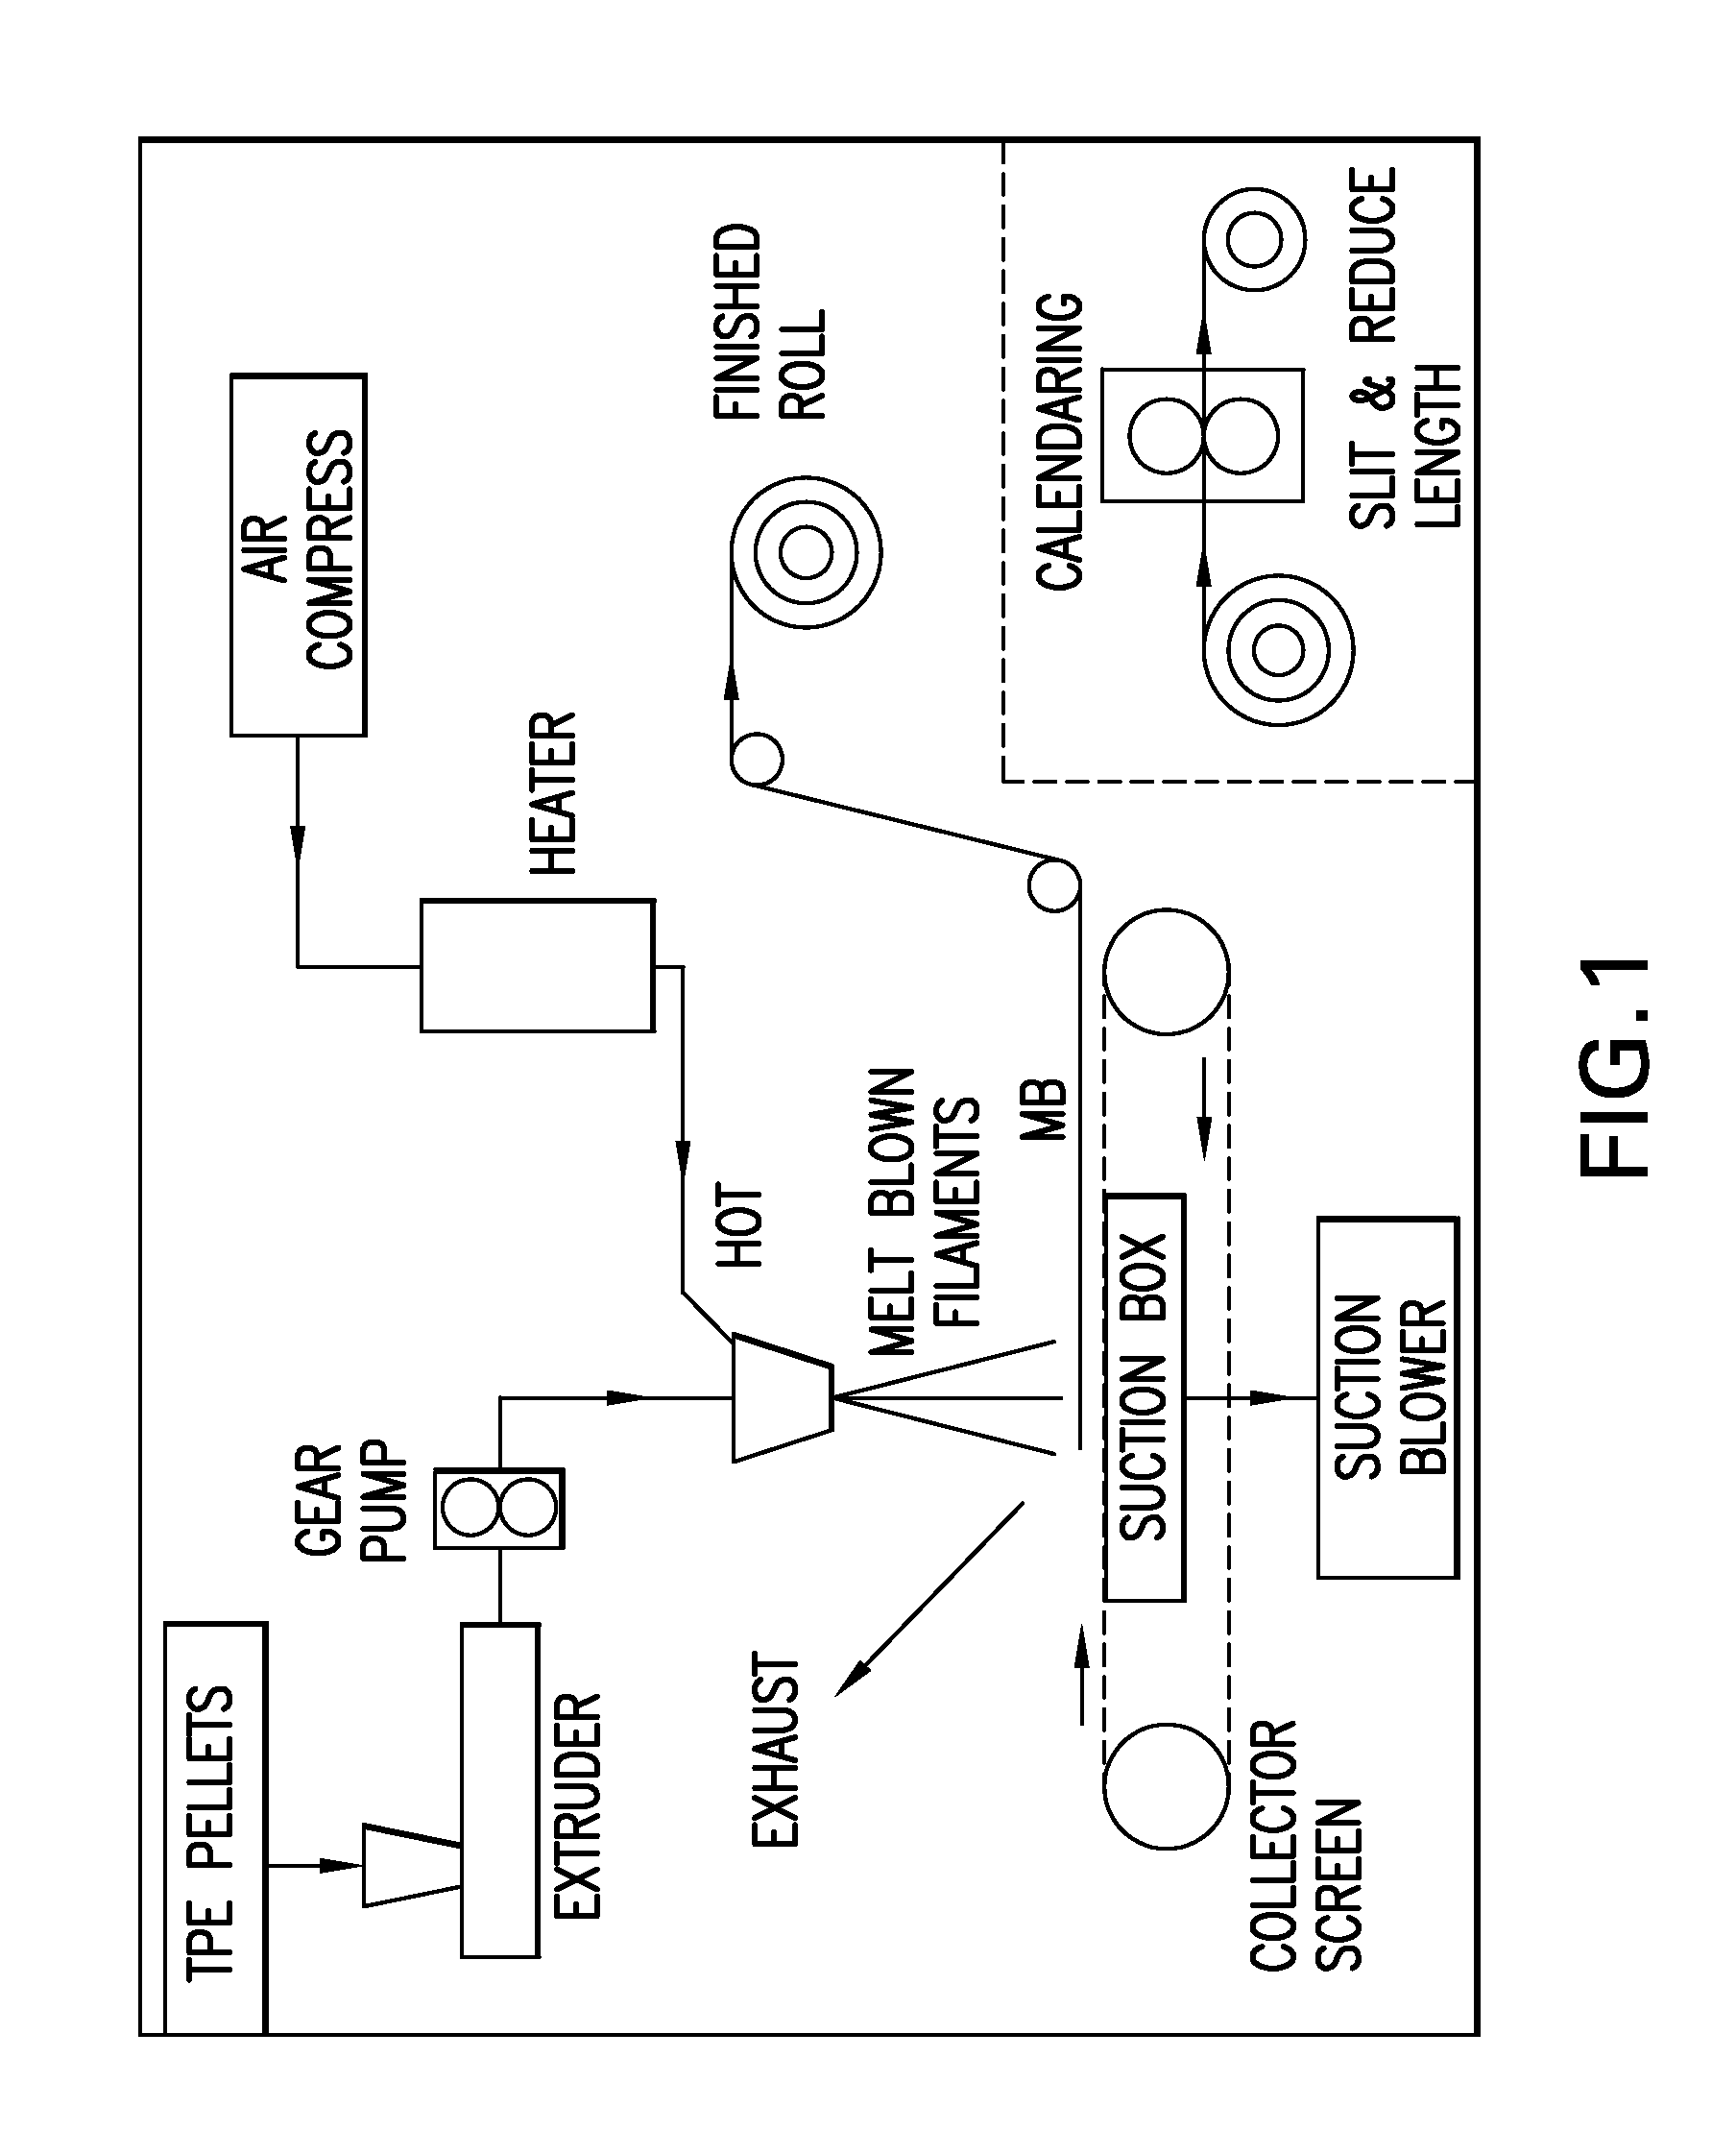 Structural composite material with improved acoustic and vibrational damping properties